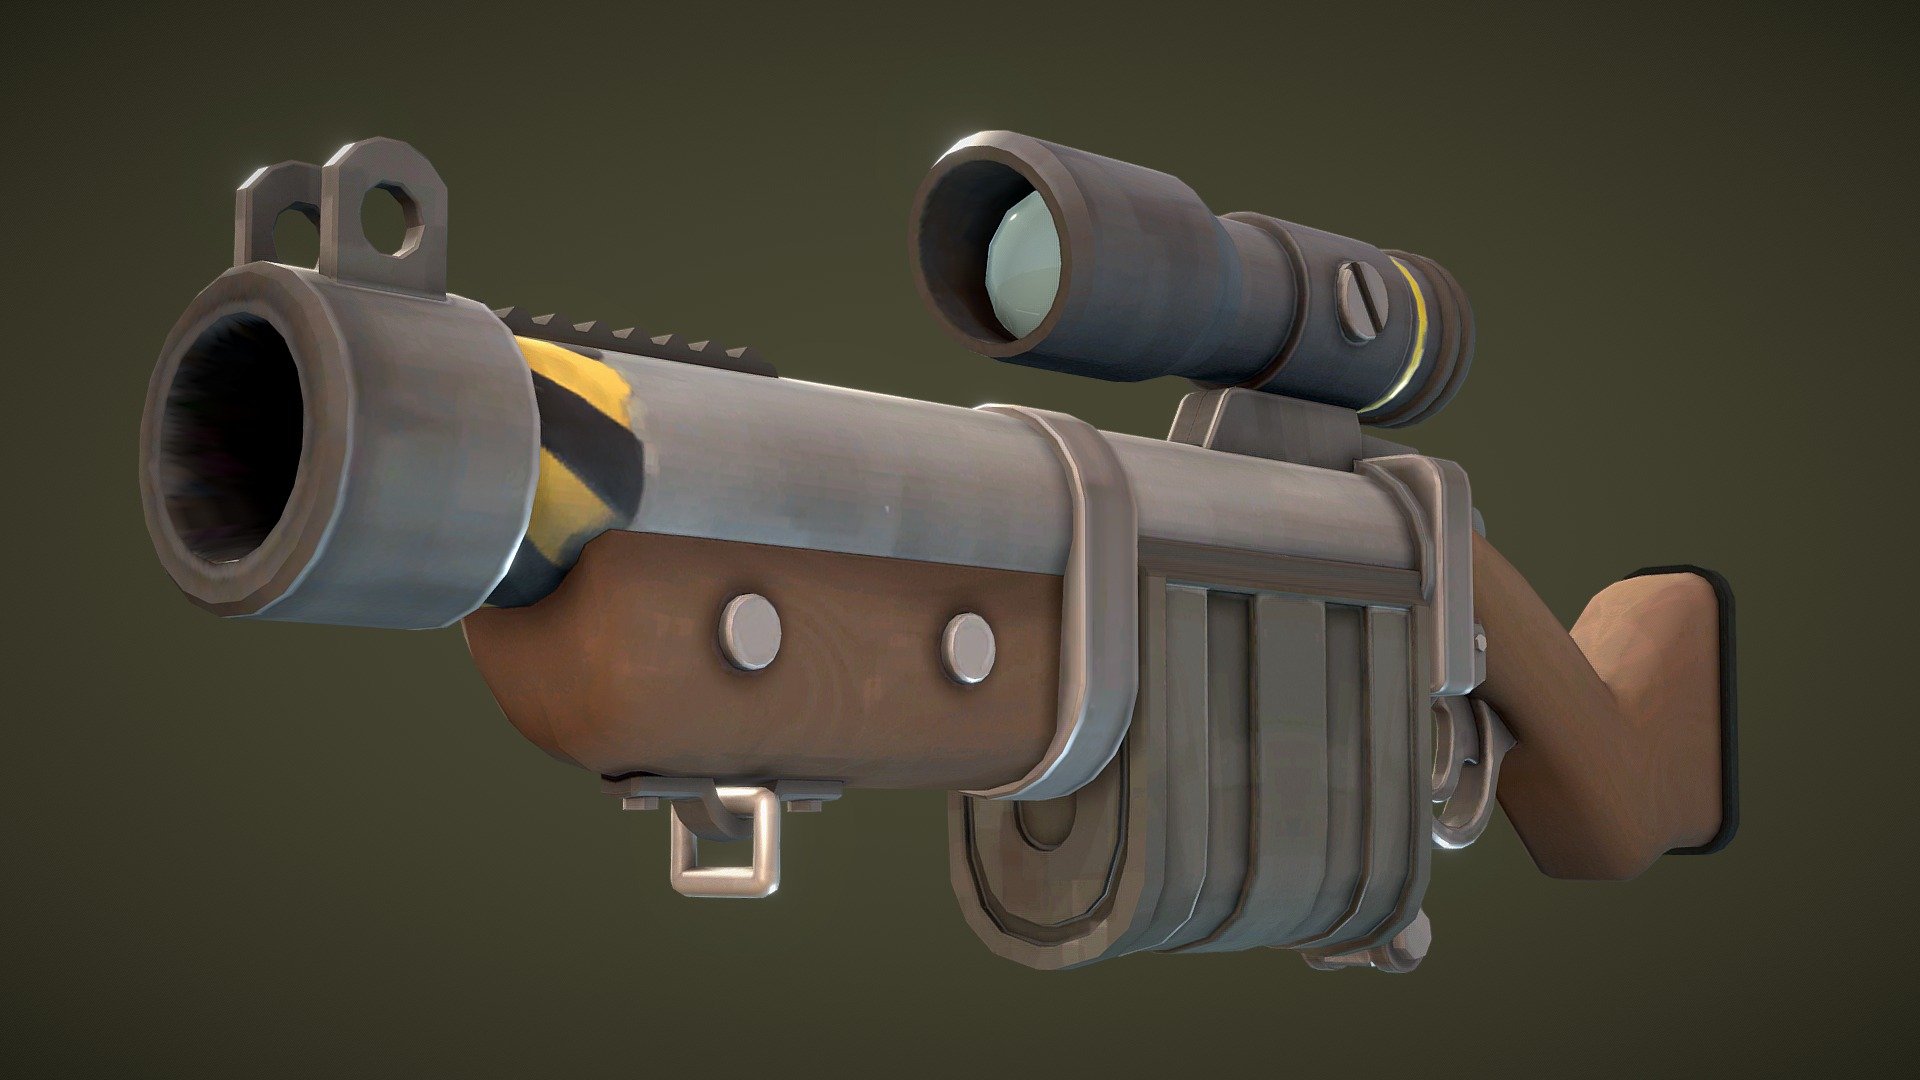 Granadier's Discharge - A Team Fortress 2 weapon